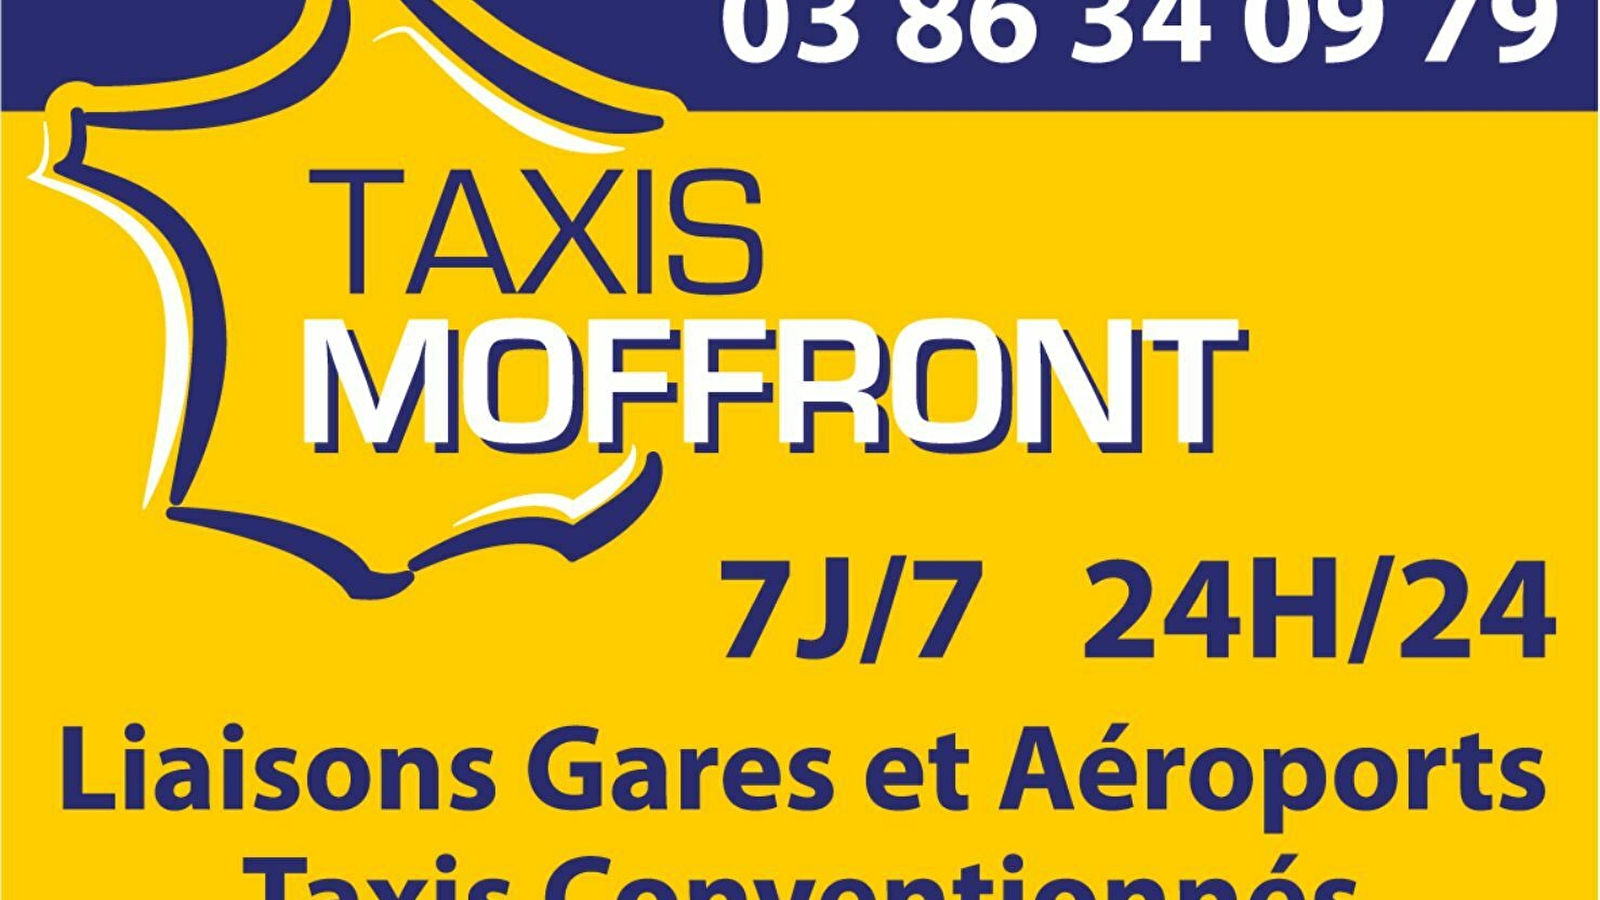 Taxis Moffront